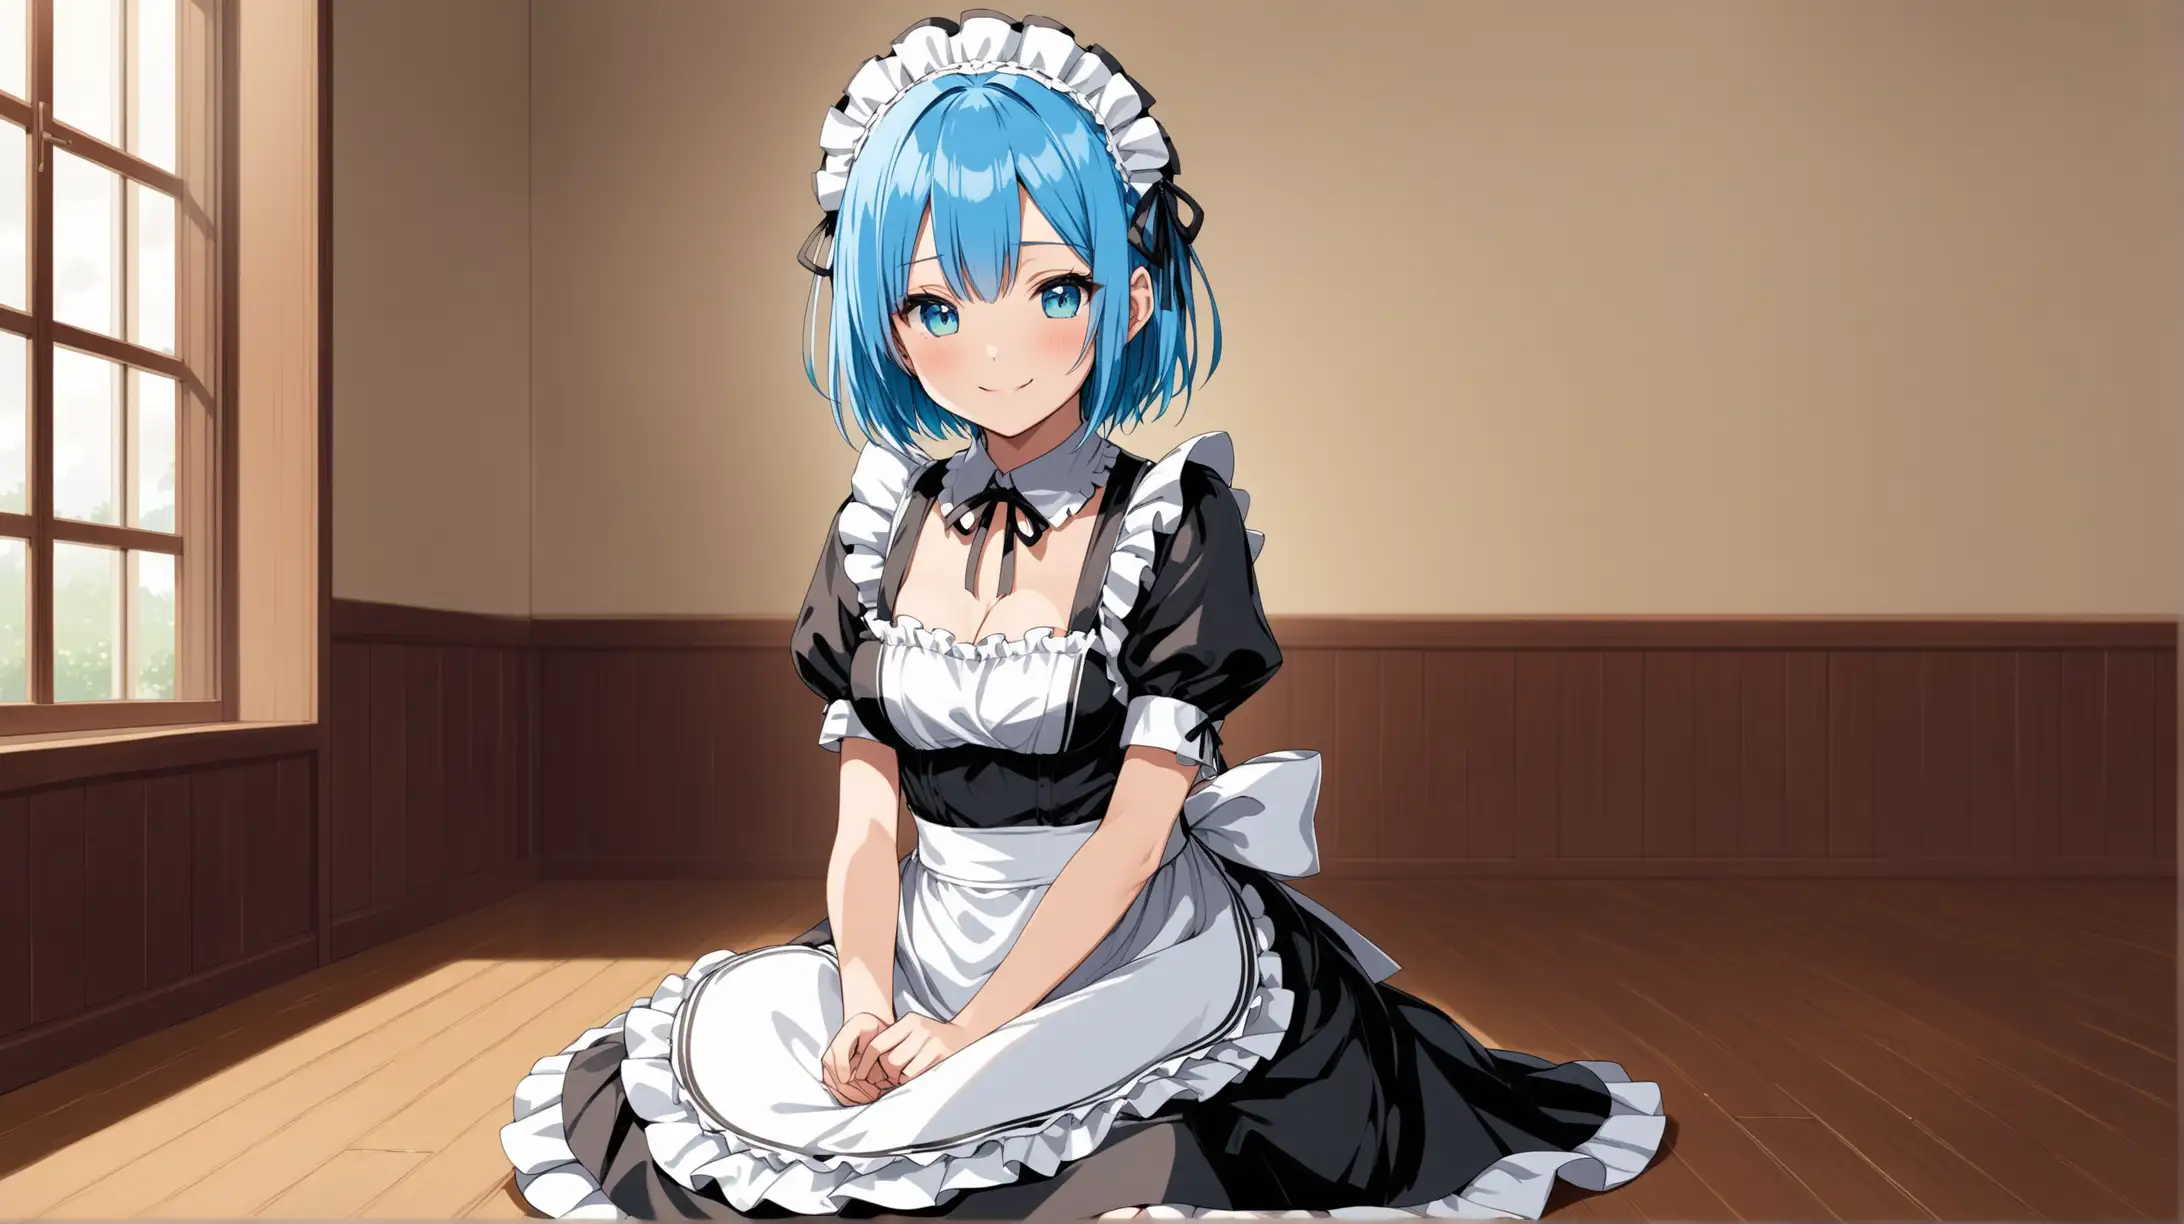 Draw the character Rem, high quality, wearing a maid outfit, sitting indoors, on an overcast day, smiling at the viewer